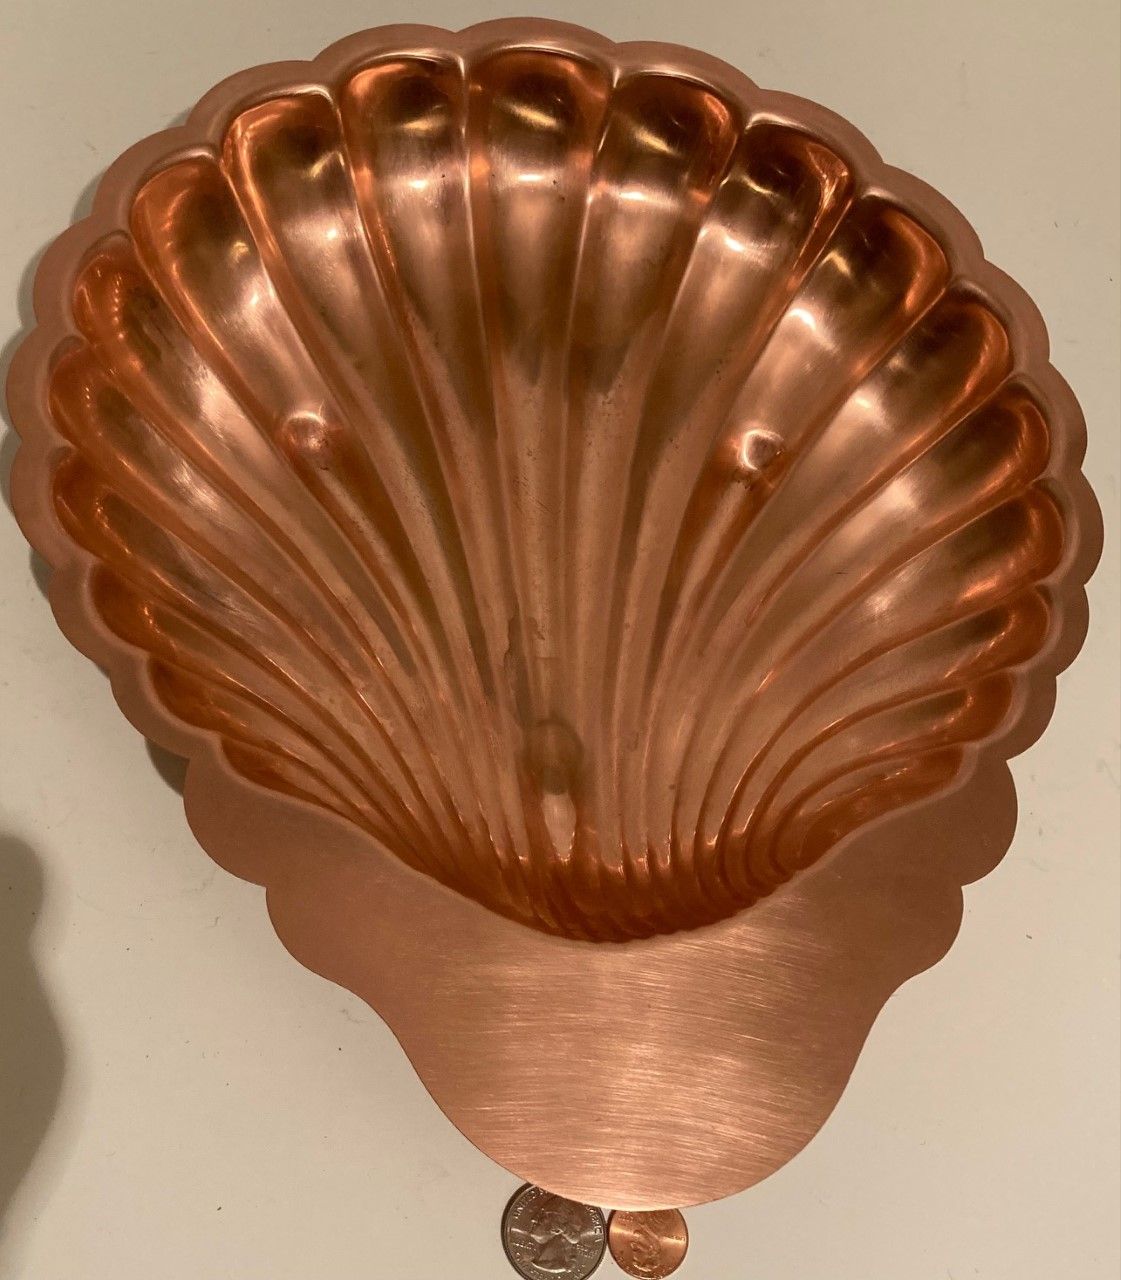 Vintage Metal Copper Serving Tray, Platter, Dish, Clam Shell, 12 1/2" x 10 1/2" x 2", Made in USA, Coppercraft, Quality, Heavy Duty, Kitchen Decor